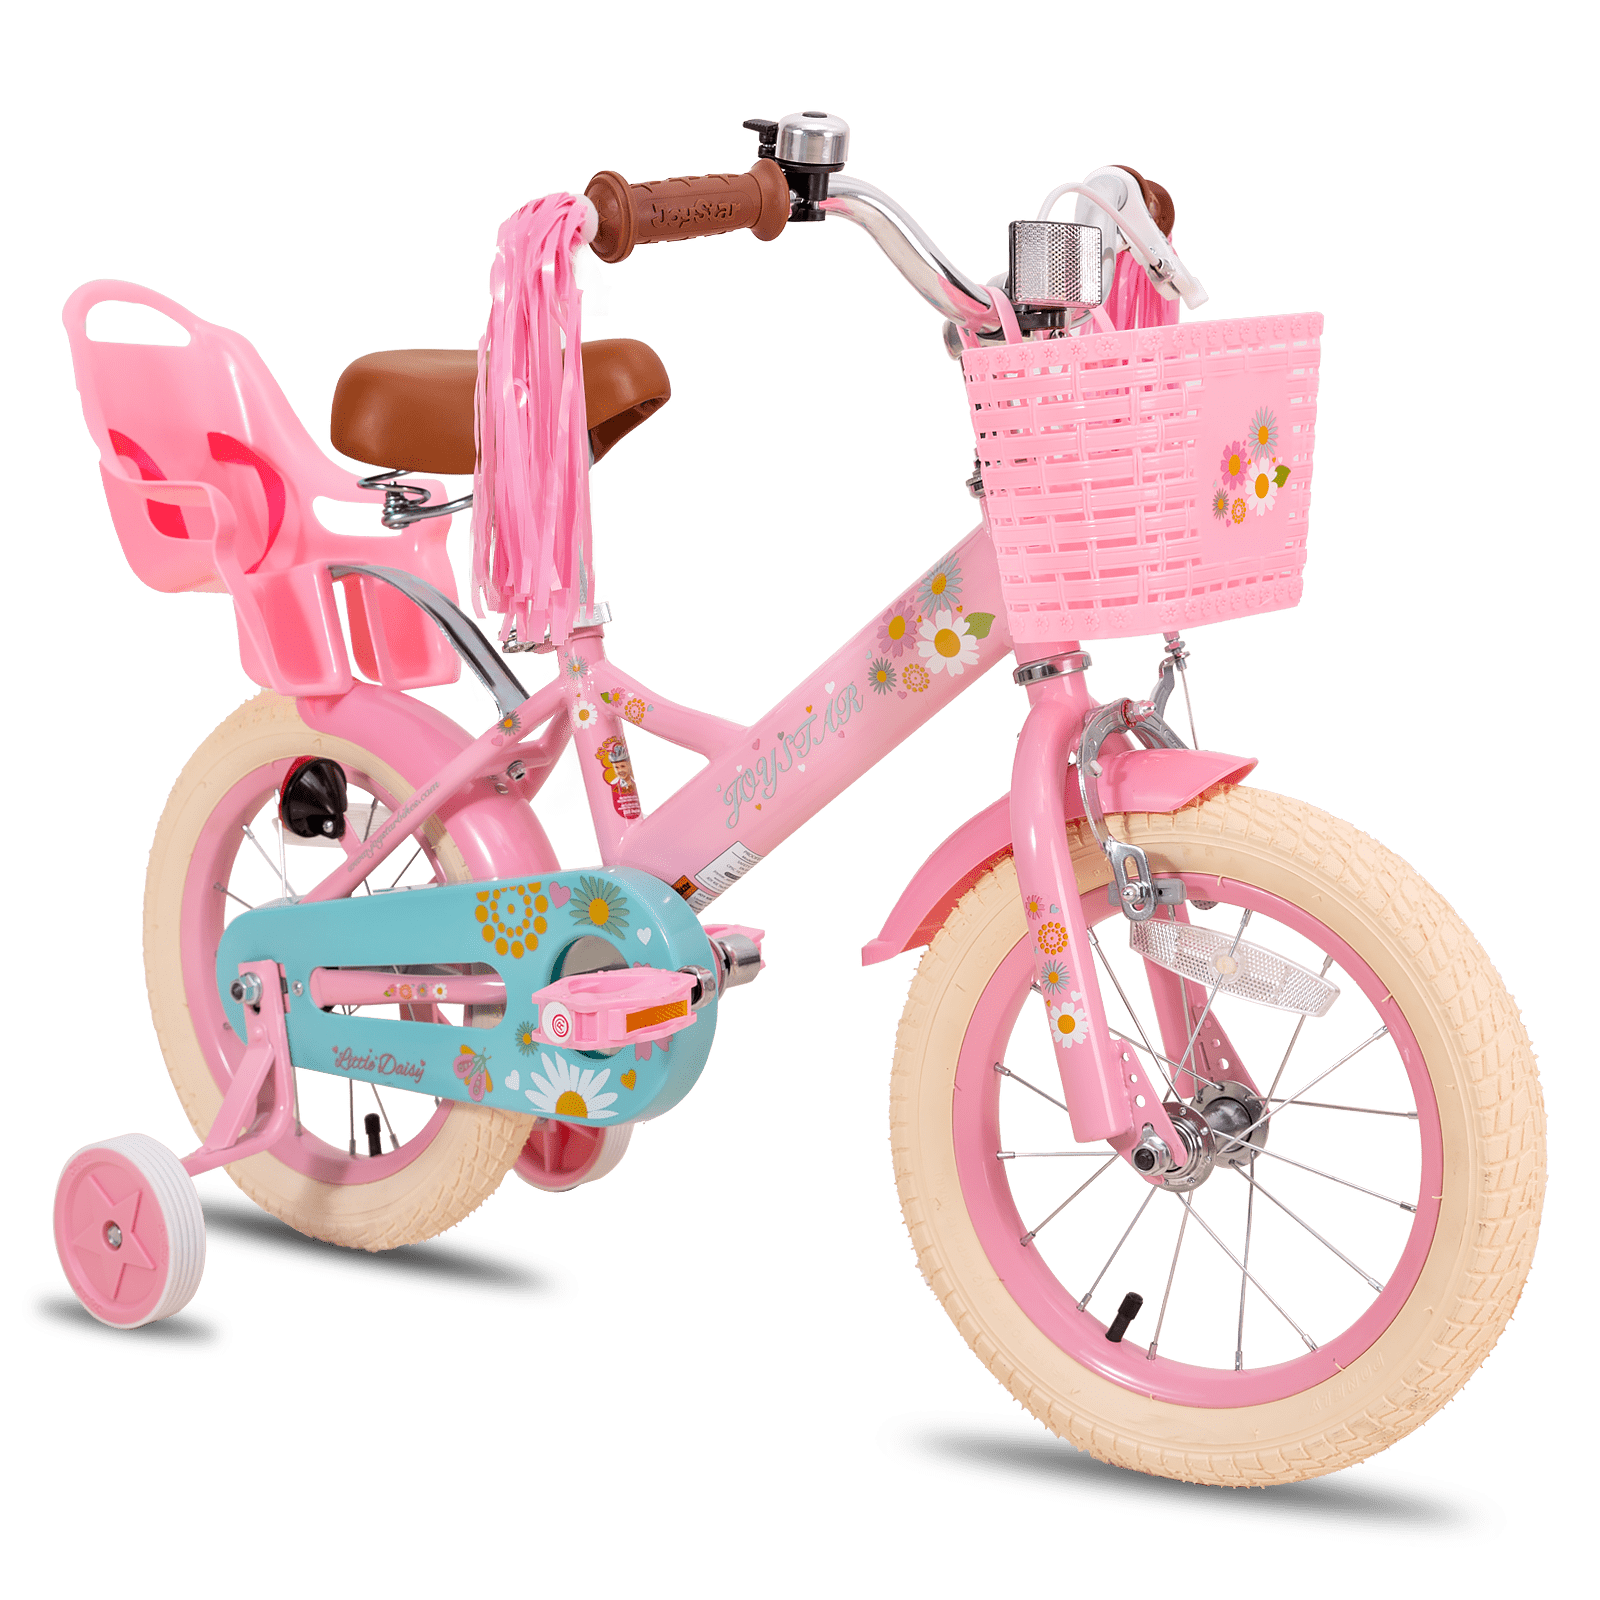 Kids Bicycle with Front Basket & Training Wheels JOYSTAR 14 Inch Kids Bike for 3-5 Years Old Girls Beige & Pink 